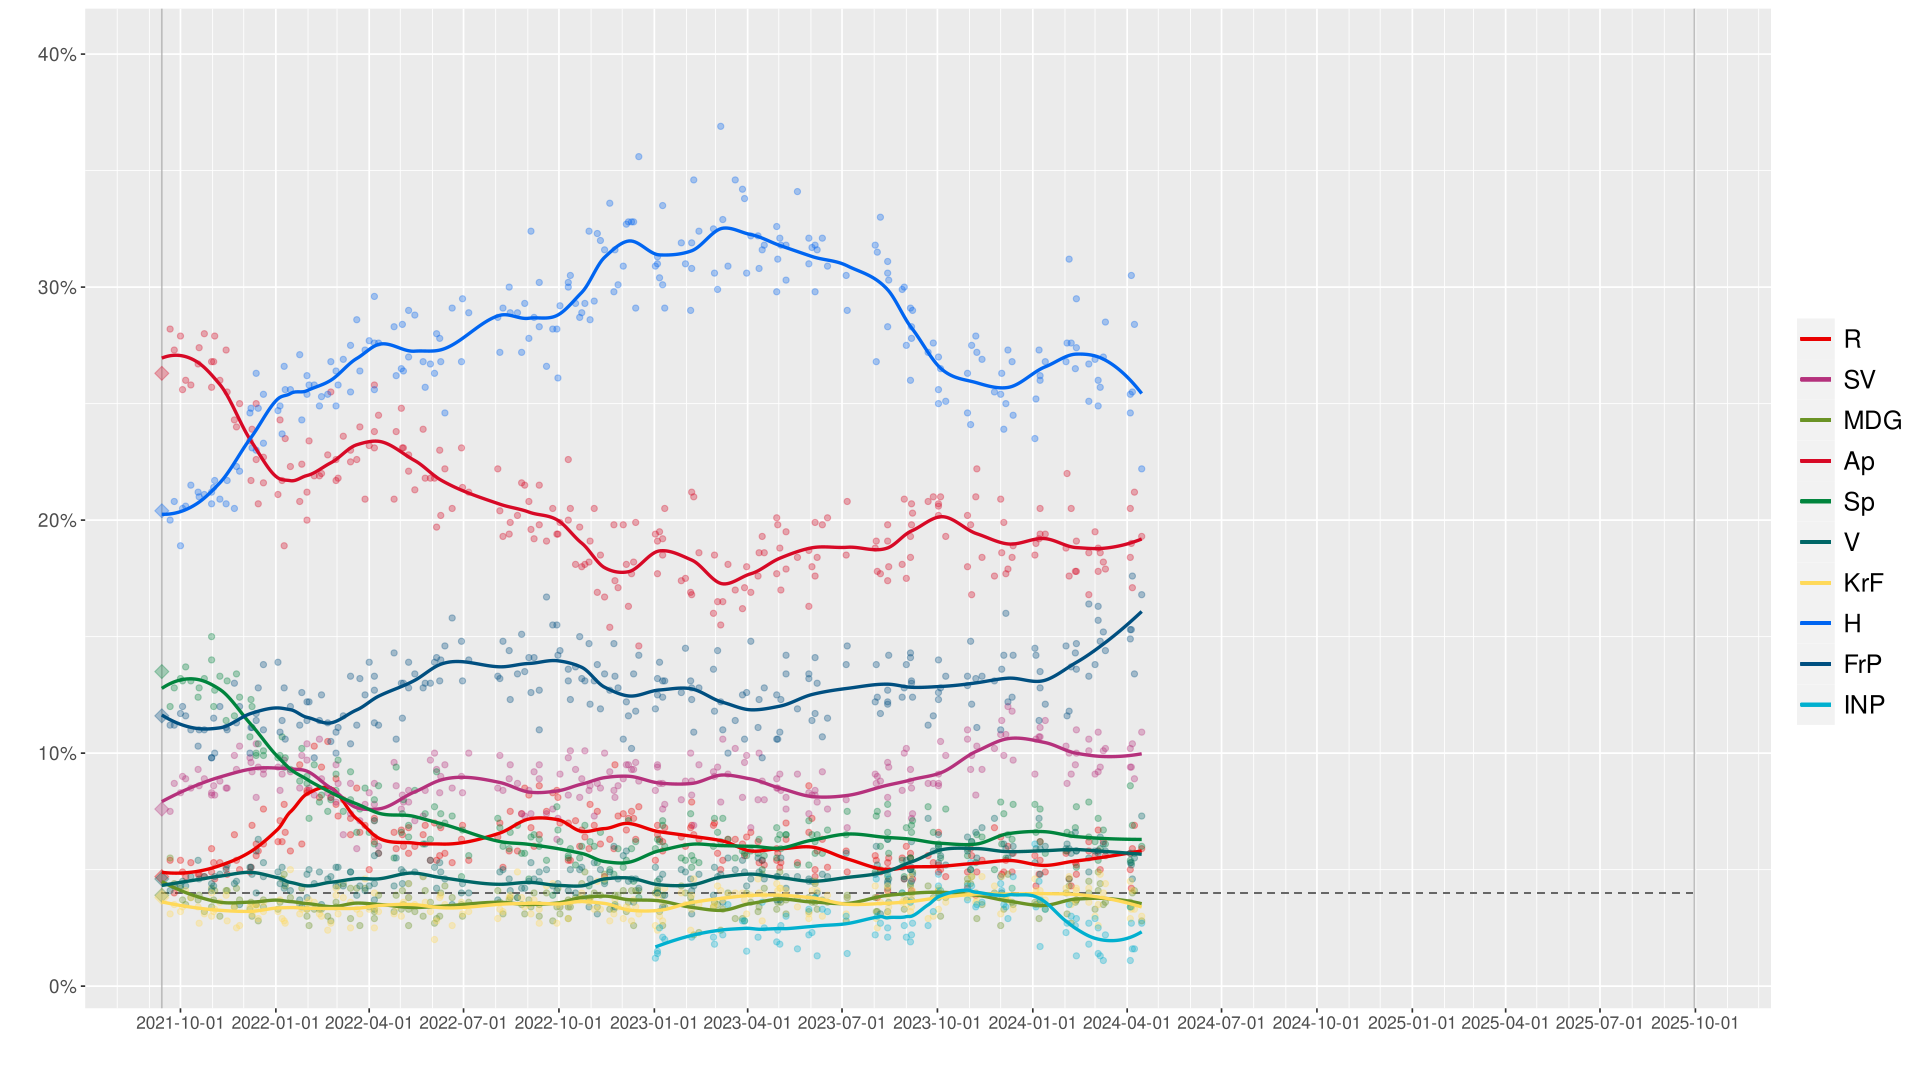 2025_norwegian_parliament_opinion_polling_svg.png